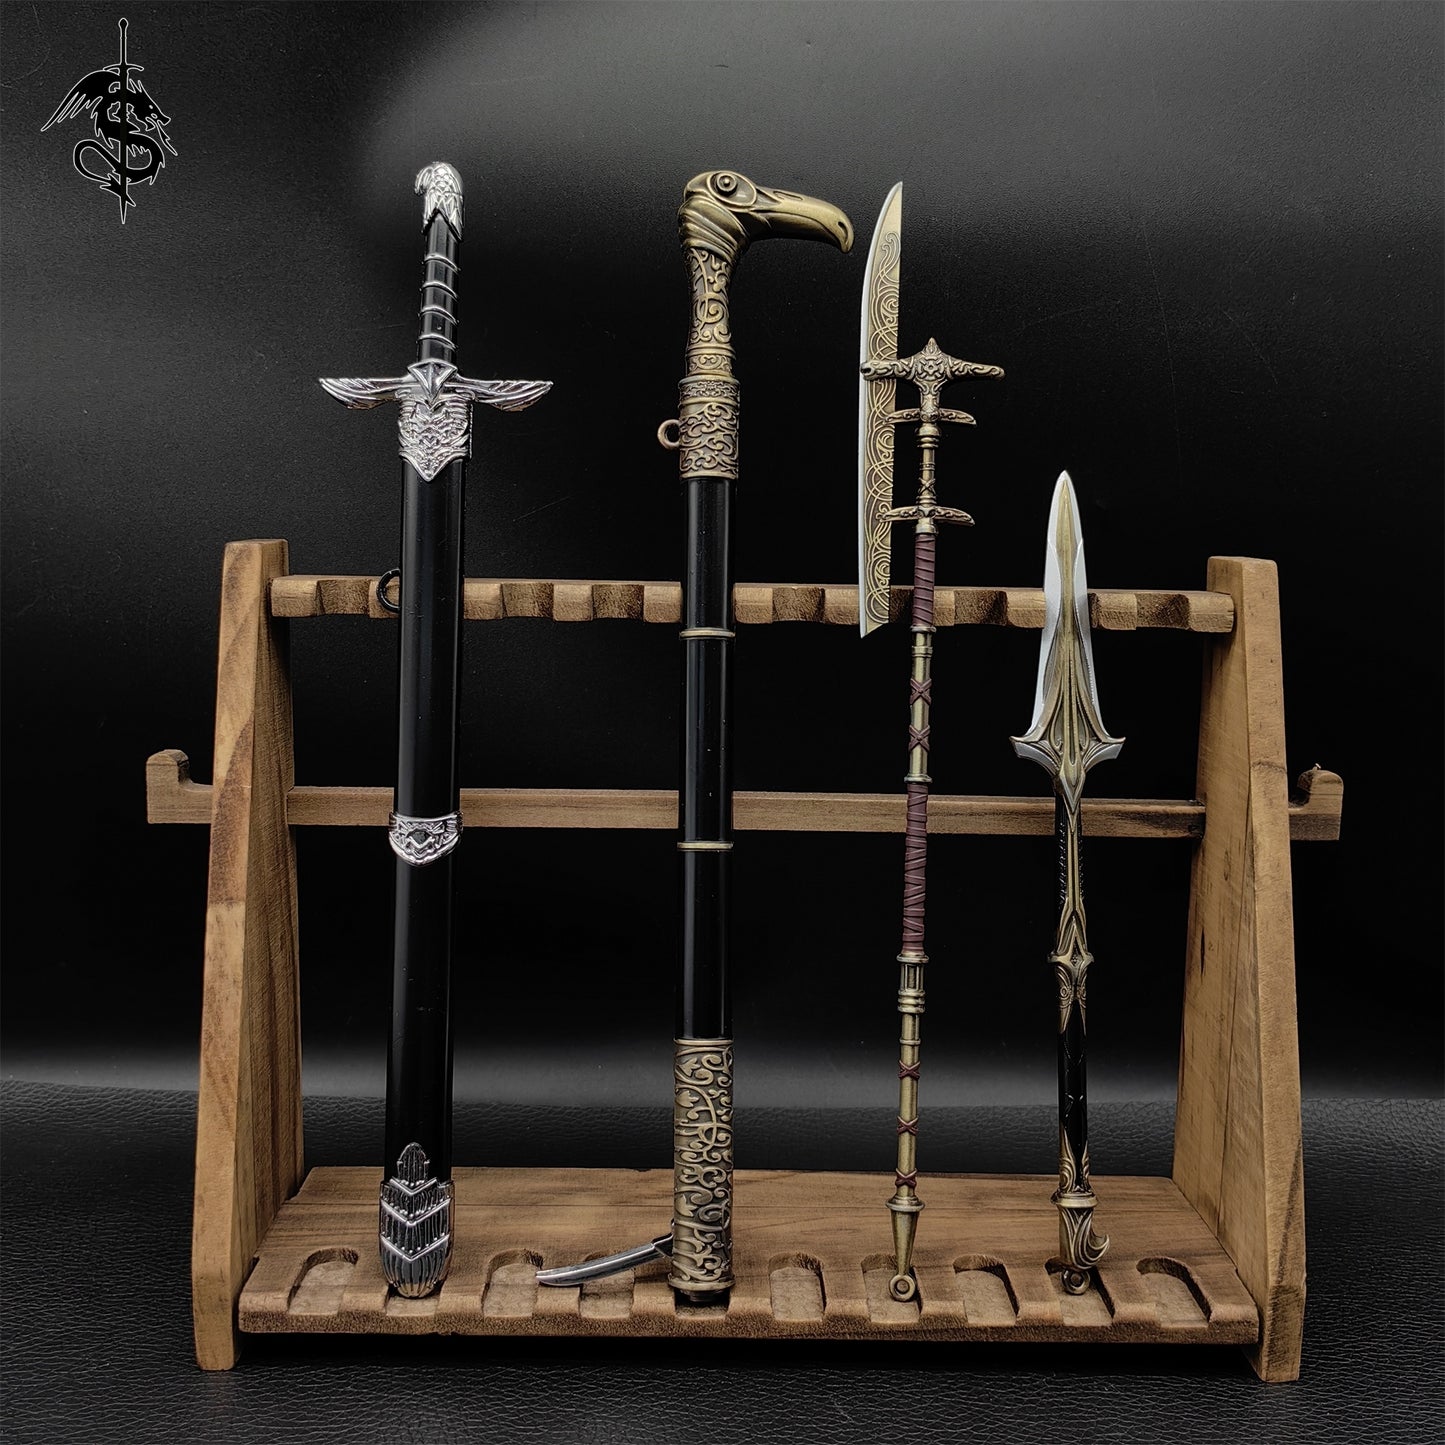 Hot Game Creed Middle Age Weapons 4 In 1 Gift Box